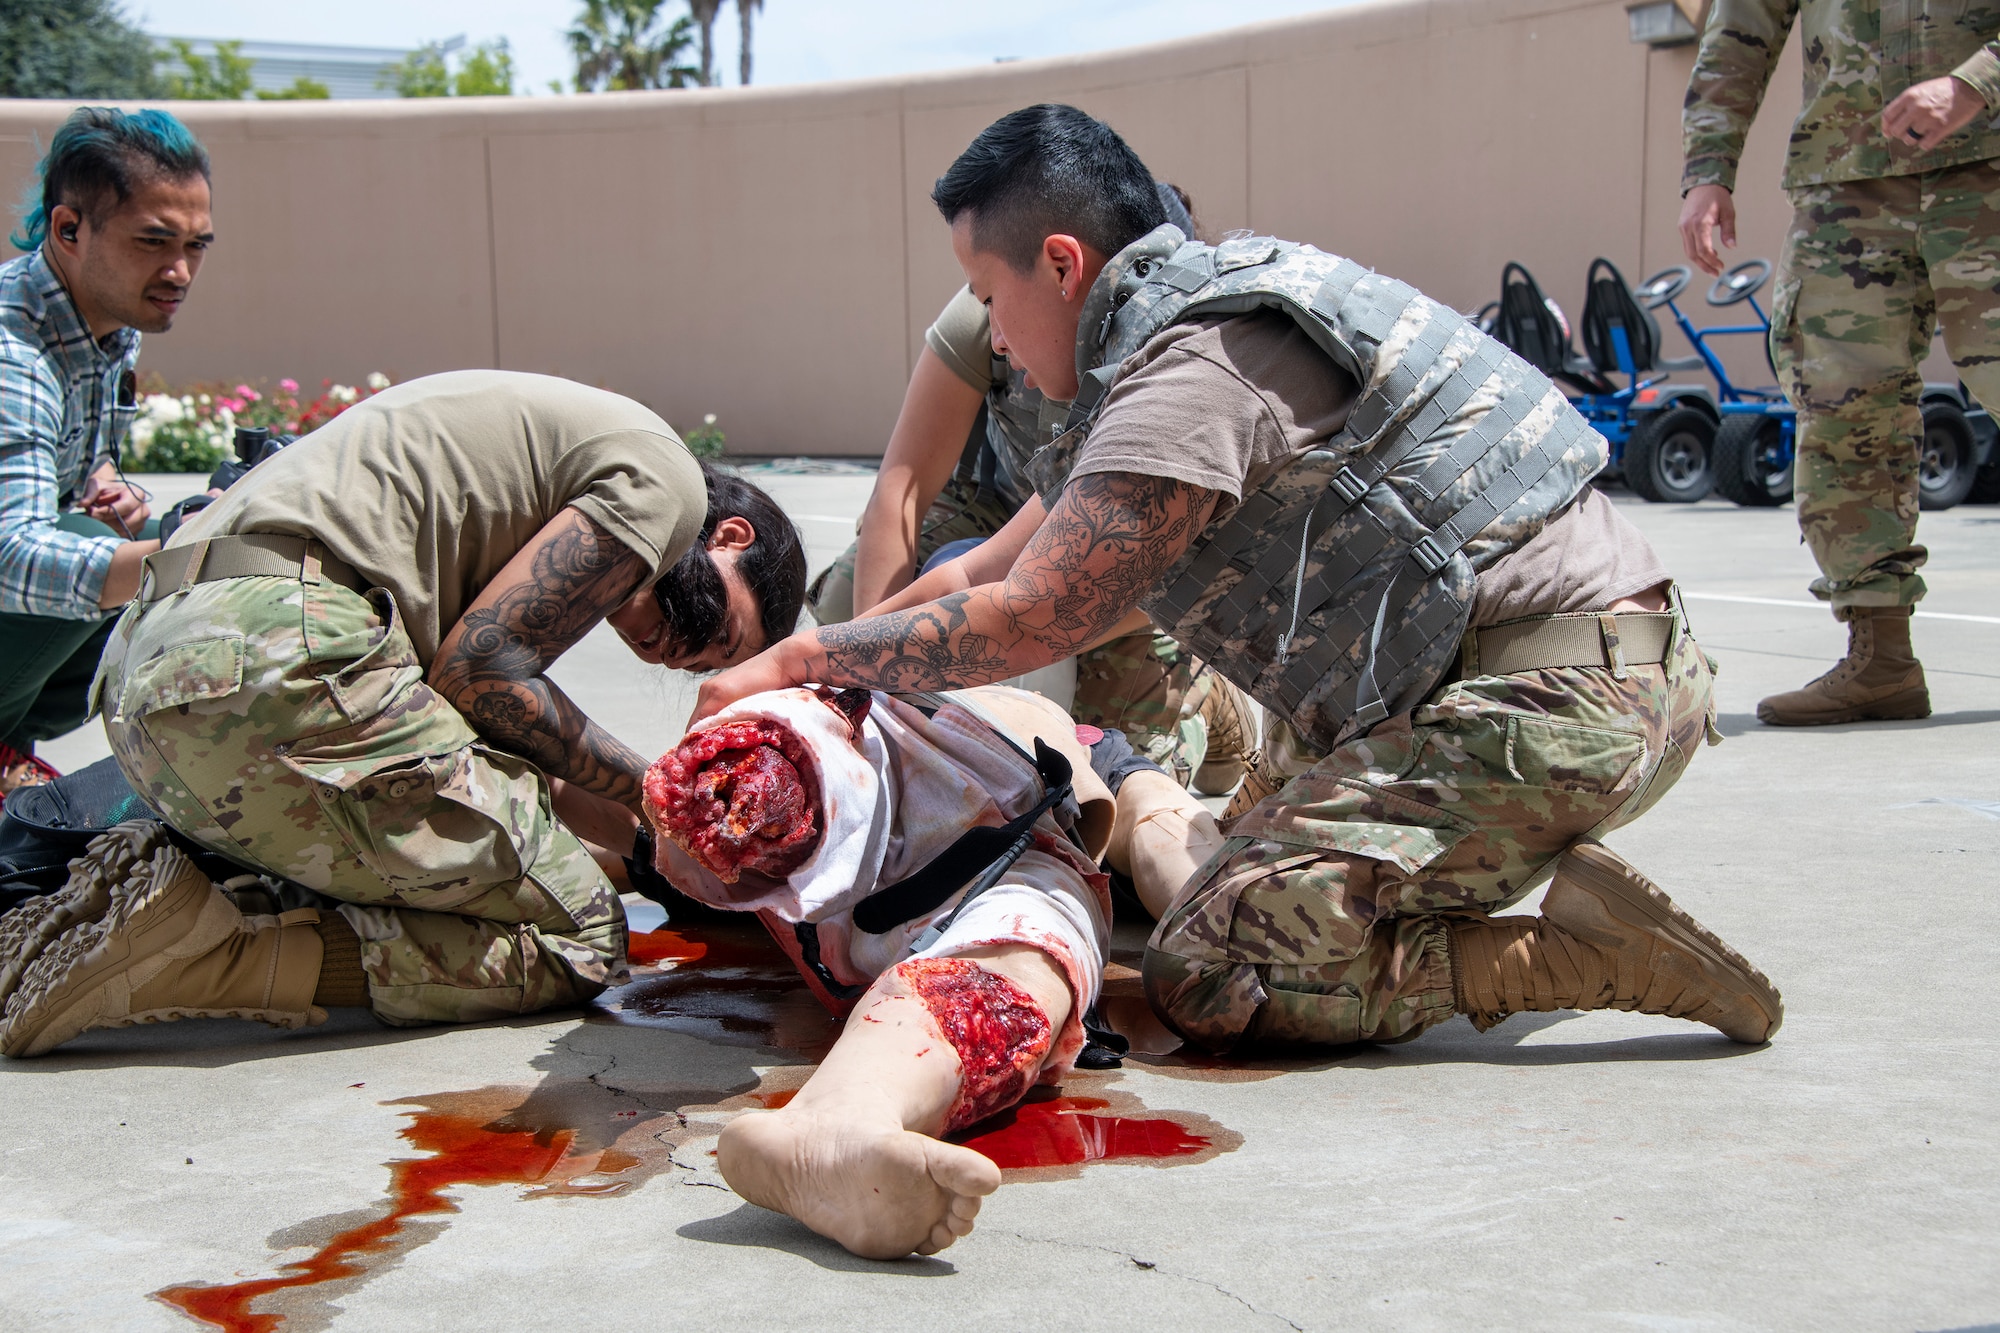 U.S. Airmen participate in medical readiness tactical combat casualty care training with a simulated patient at David Grant USAF Medical Center, Travis Air Force Base, California, April 29, 2022.